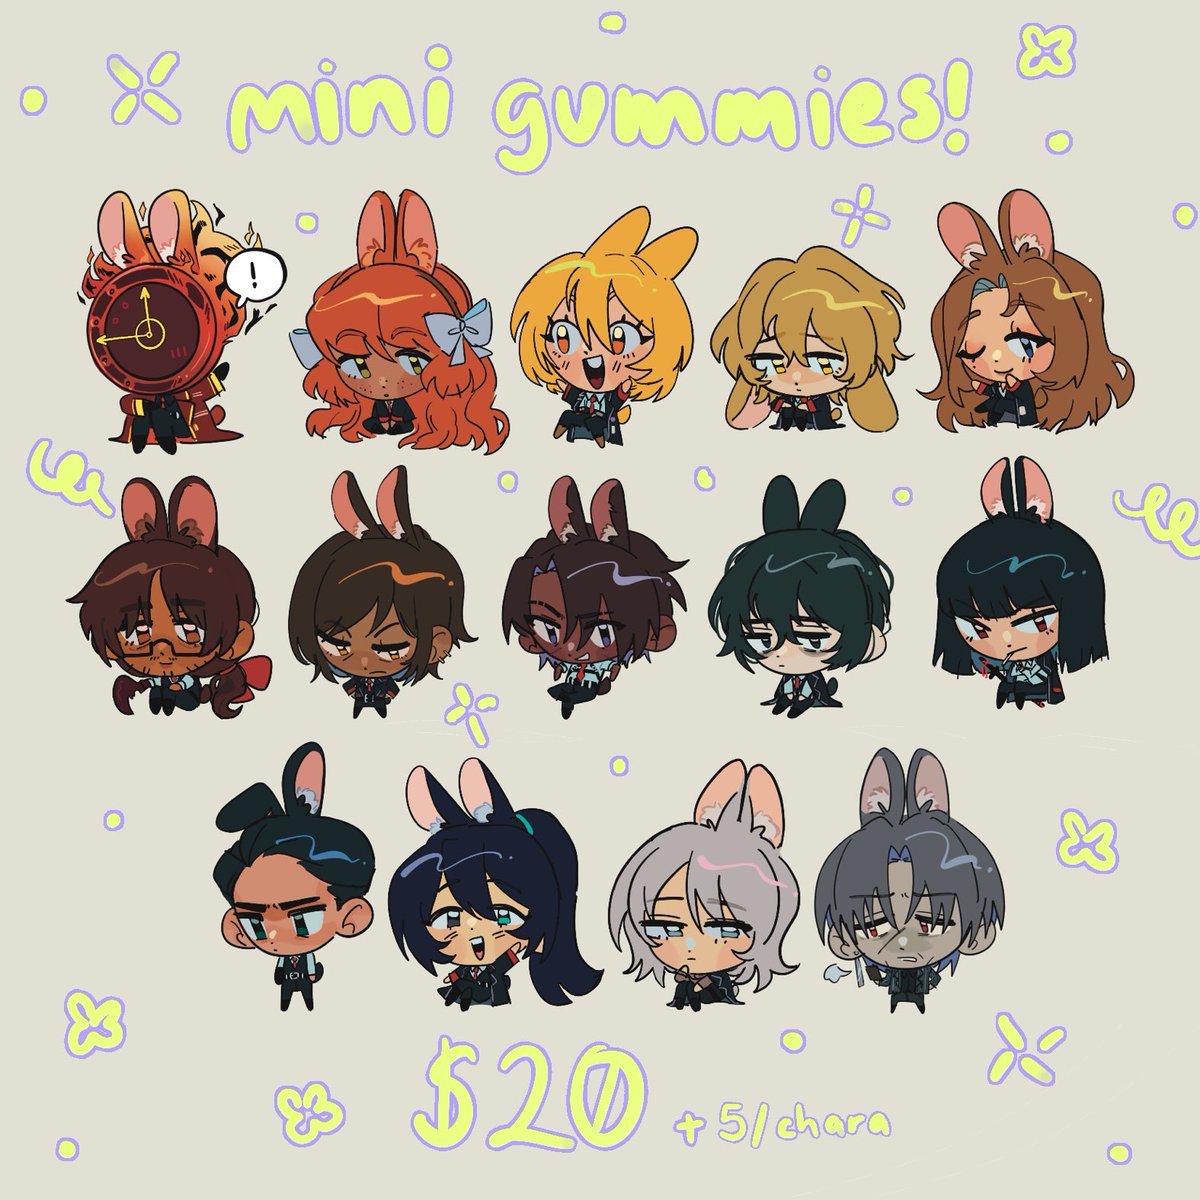 「[ APRIL CMSN OPEN! ] rts apprciated! ope」|emm 🐇 cf16 E-08のイラスト